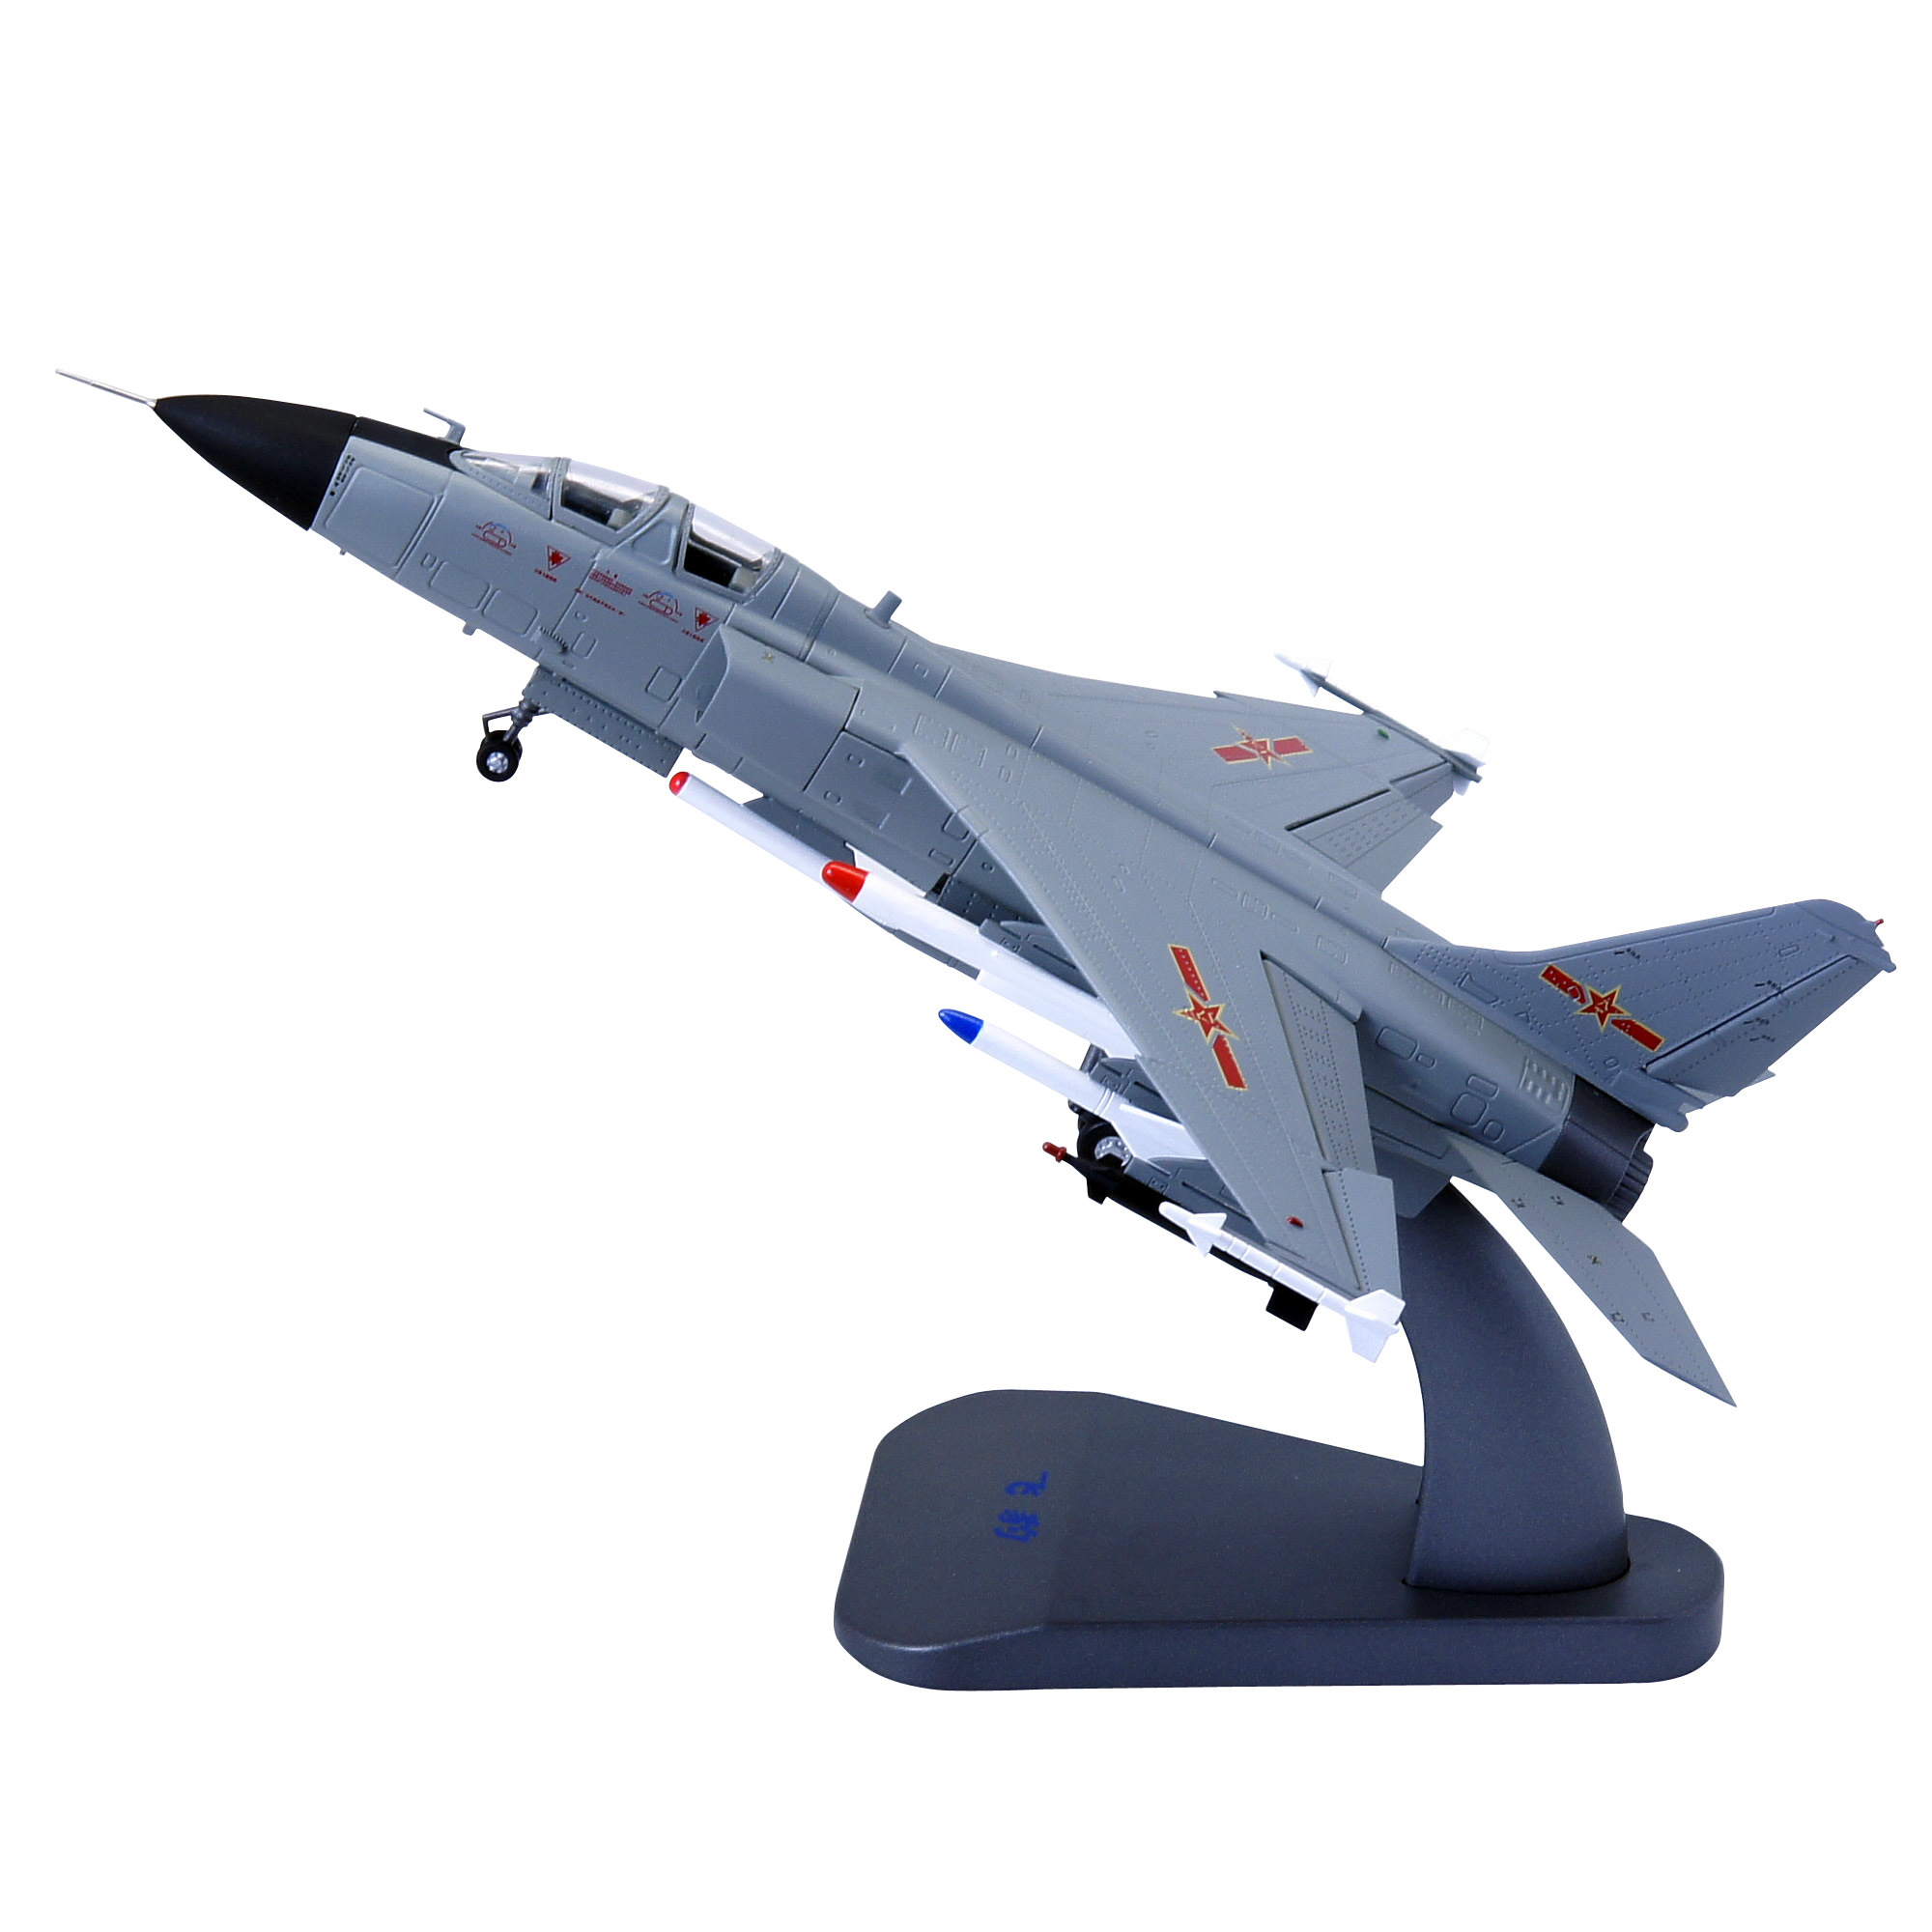 China Jh-7 Fbc Bomber Model Metal Die Cast Model with All Extra Details W/Landing Gear and Stand in 1/72 Scale Model Display